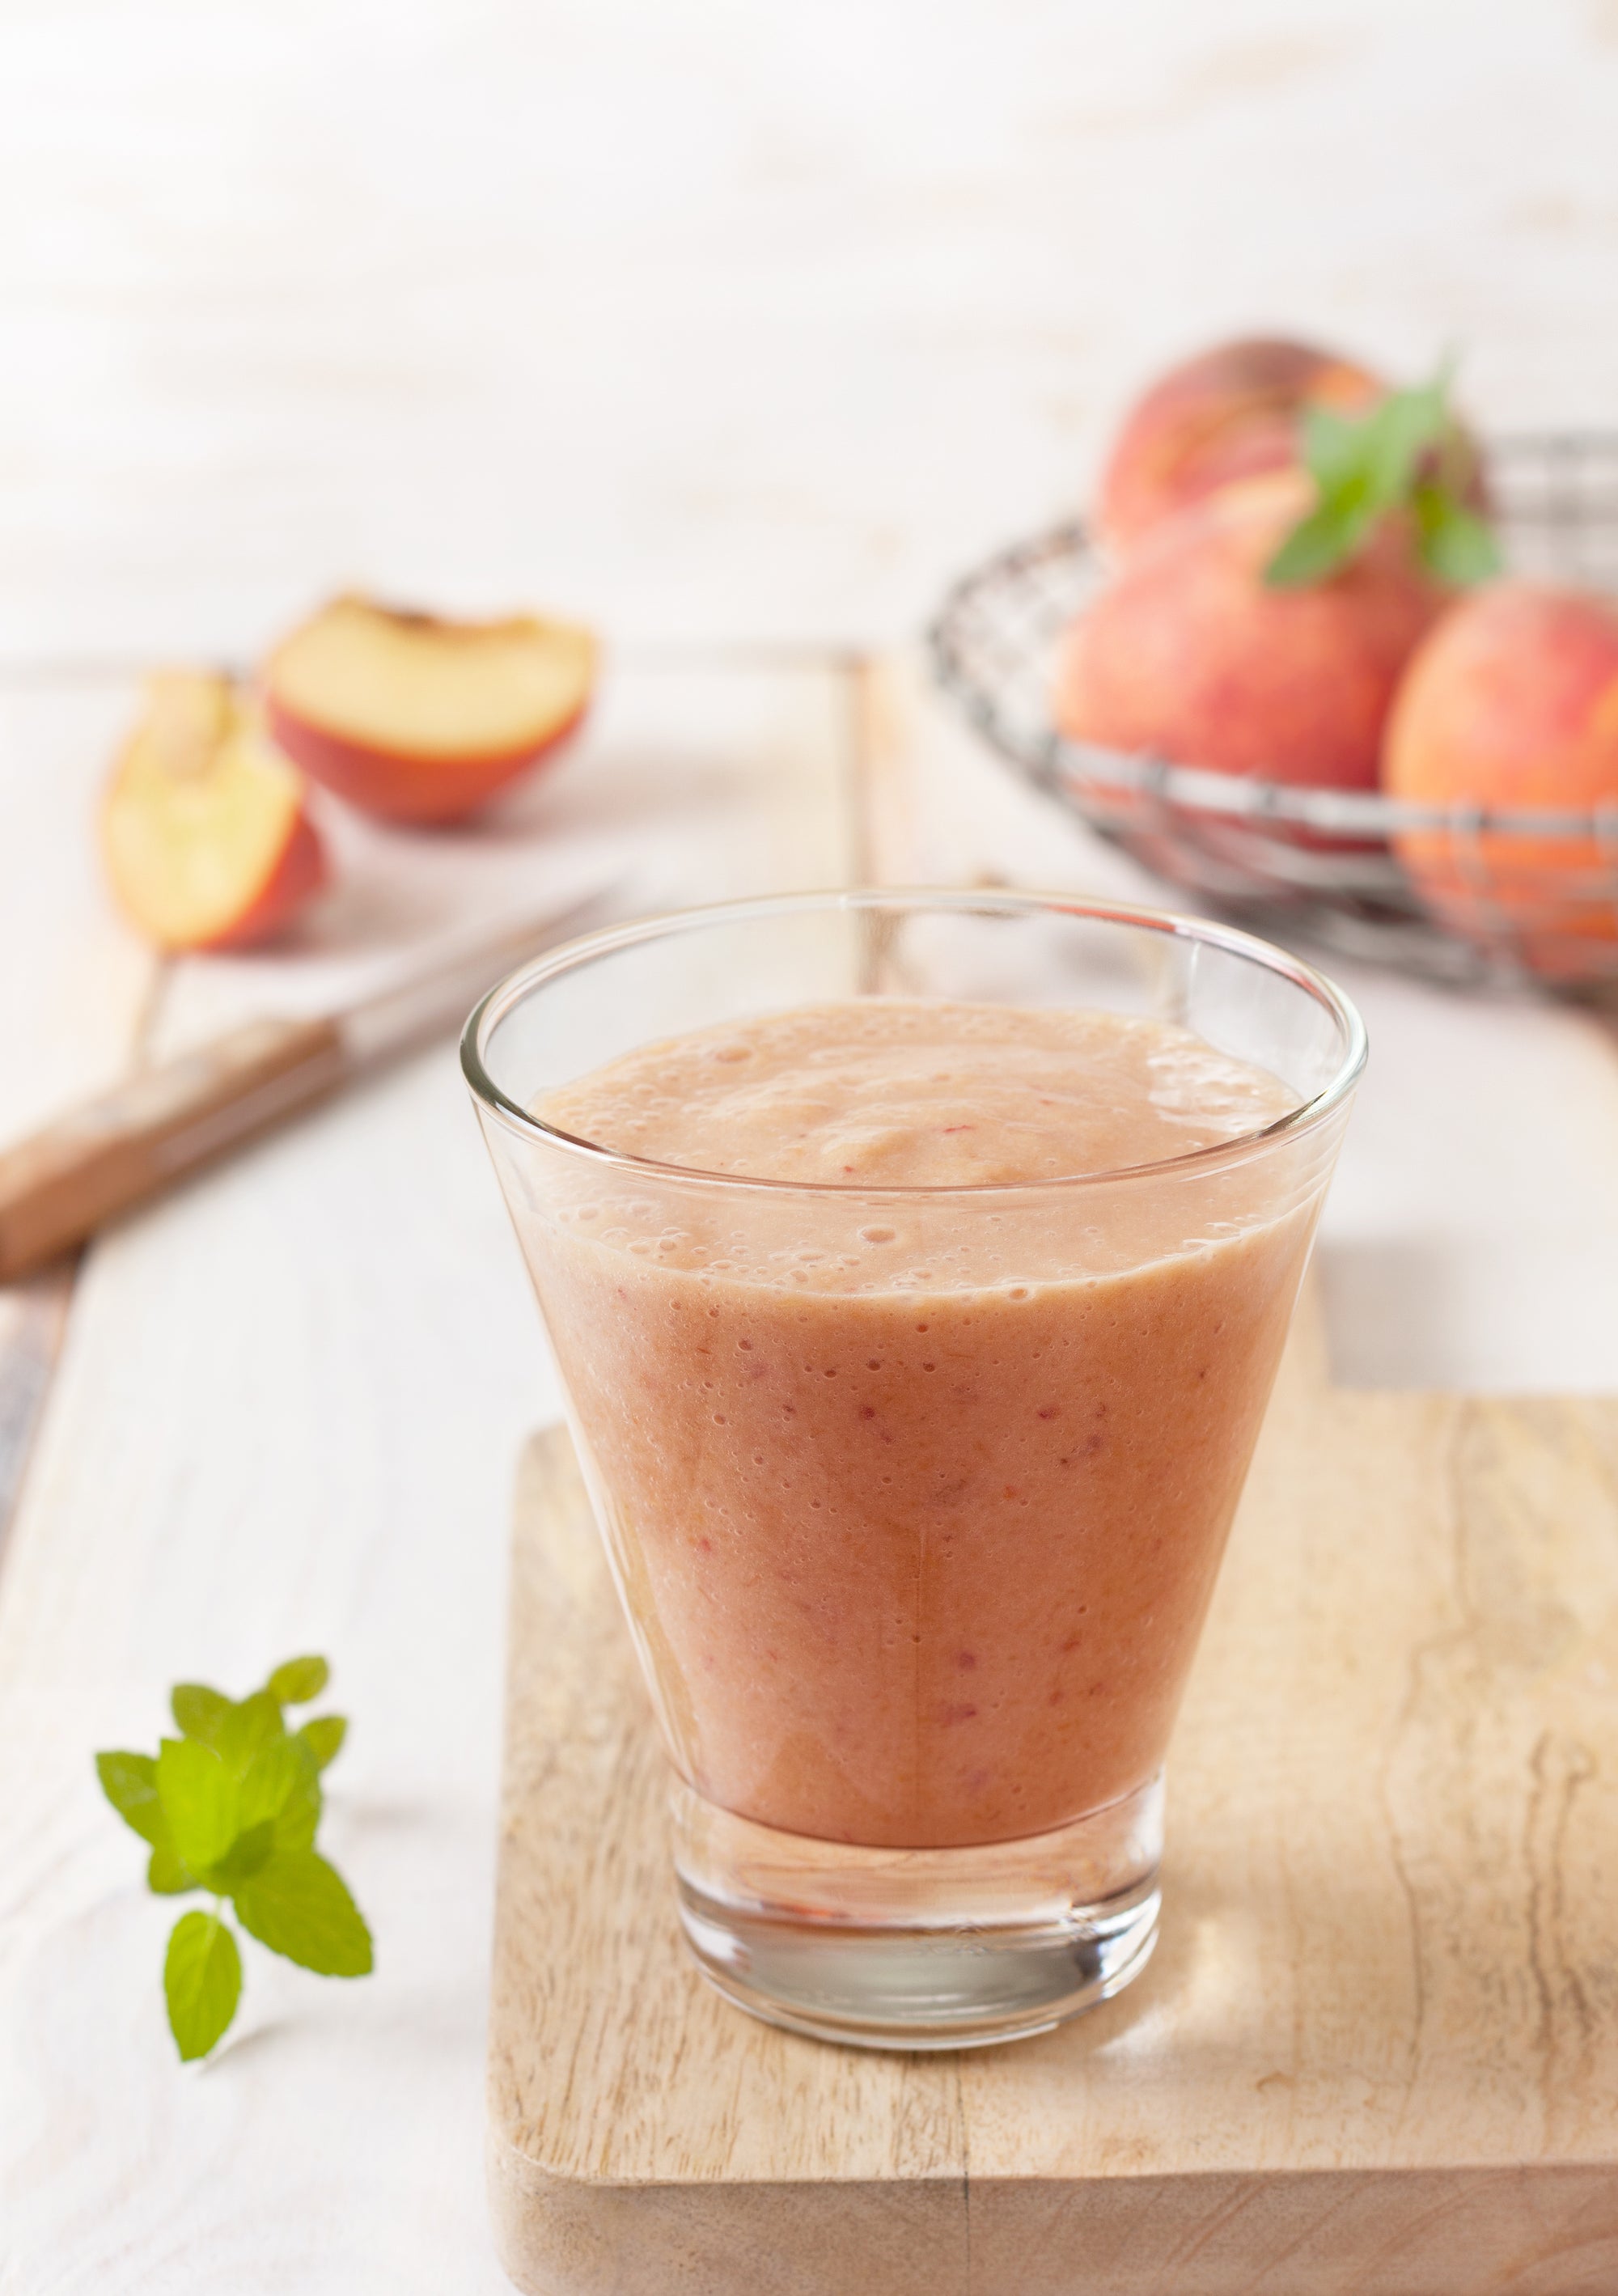 a glass of mixed banana, strawberries, and peaches smoothie on top of a wooden chopping board with knife and slices of two peaches and a fruit basket of peaches